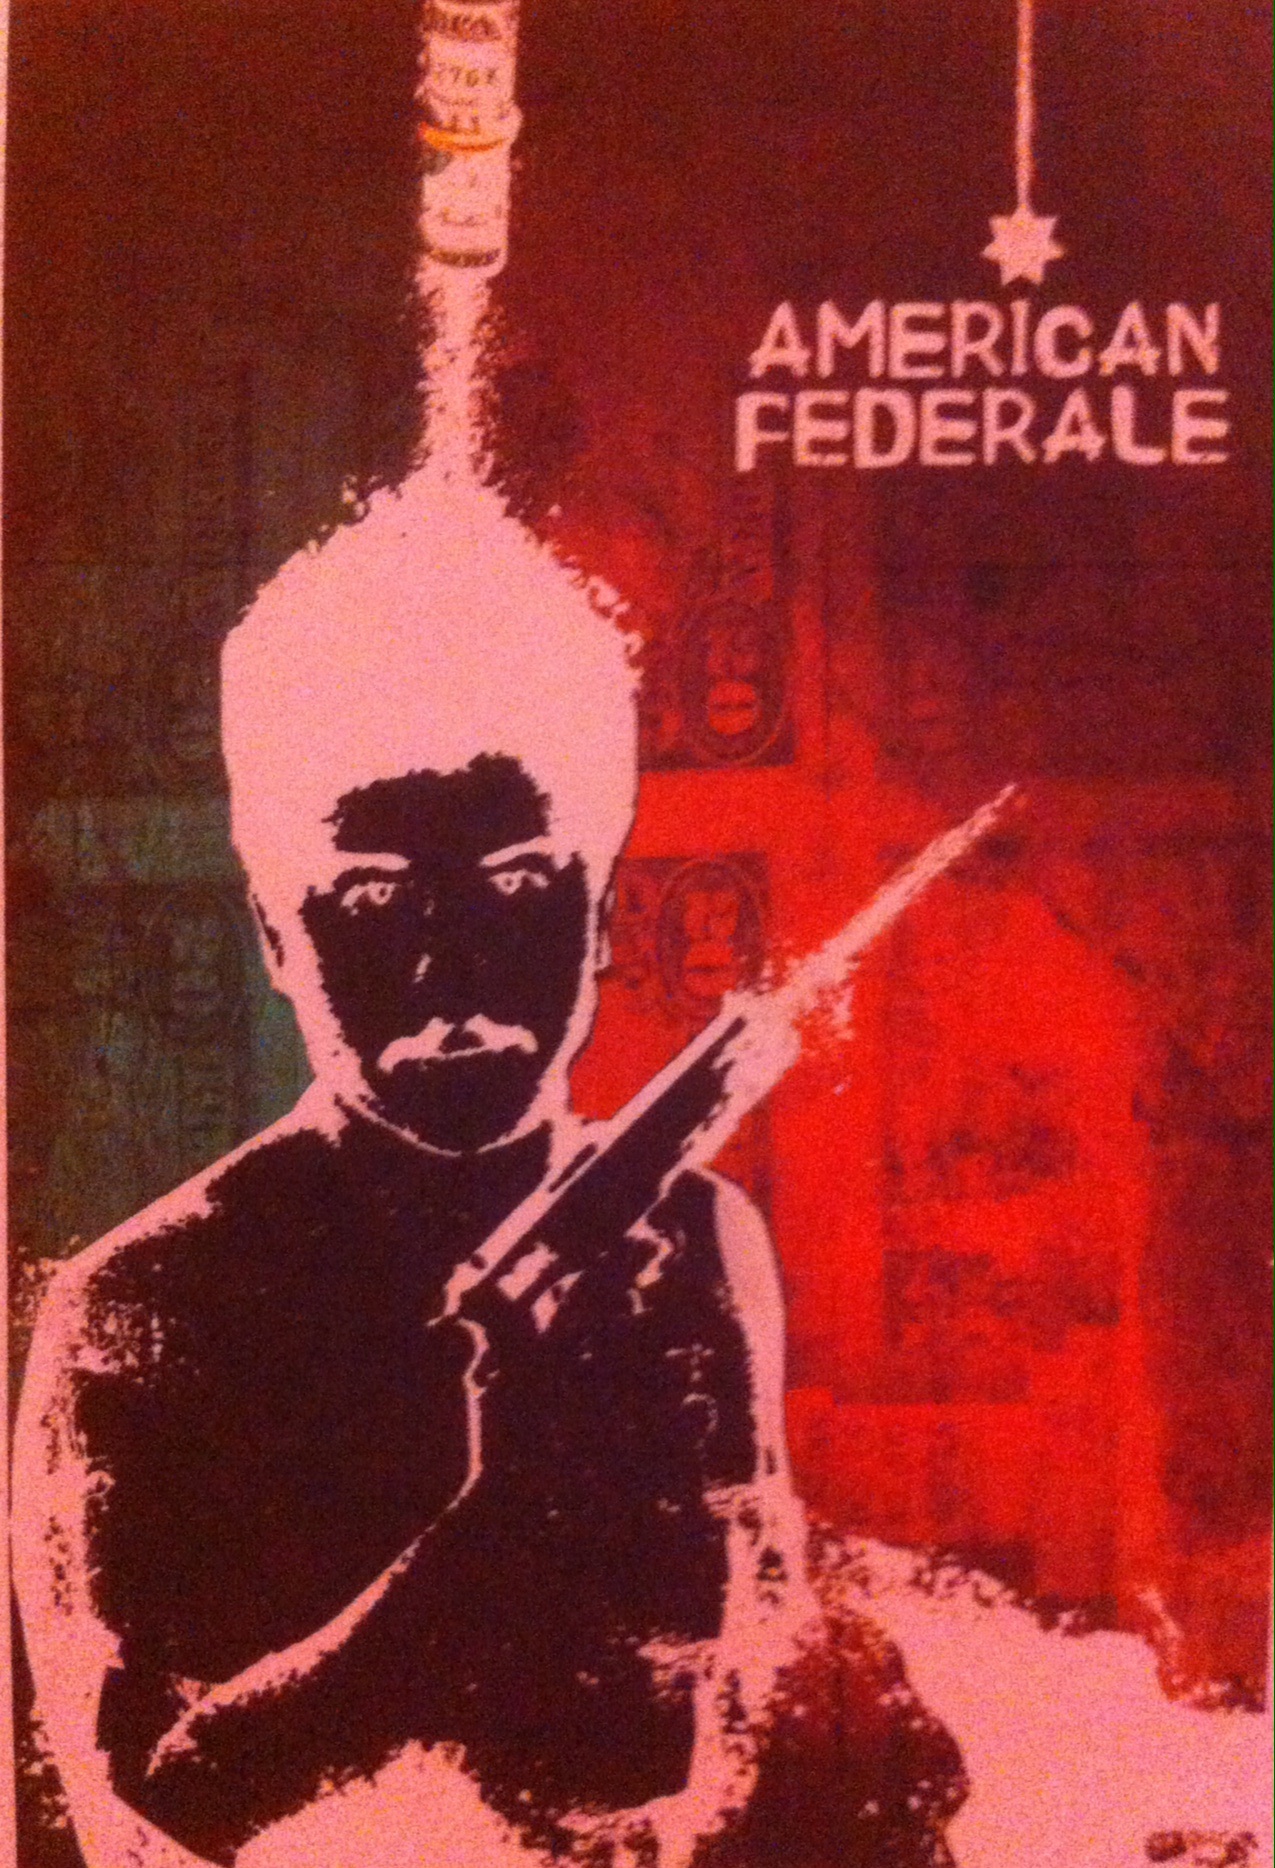 American Federale cover poster